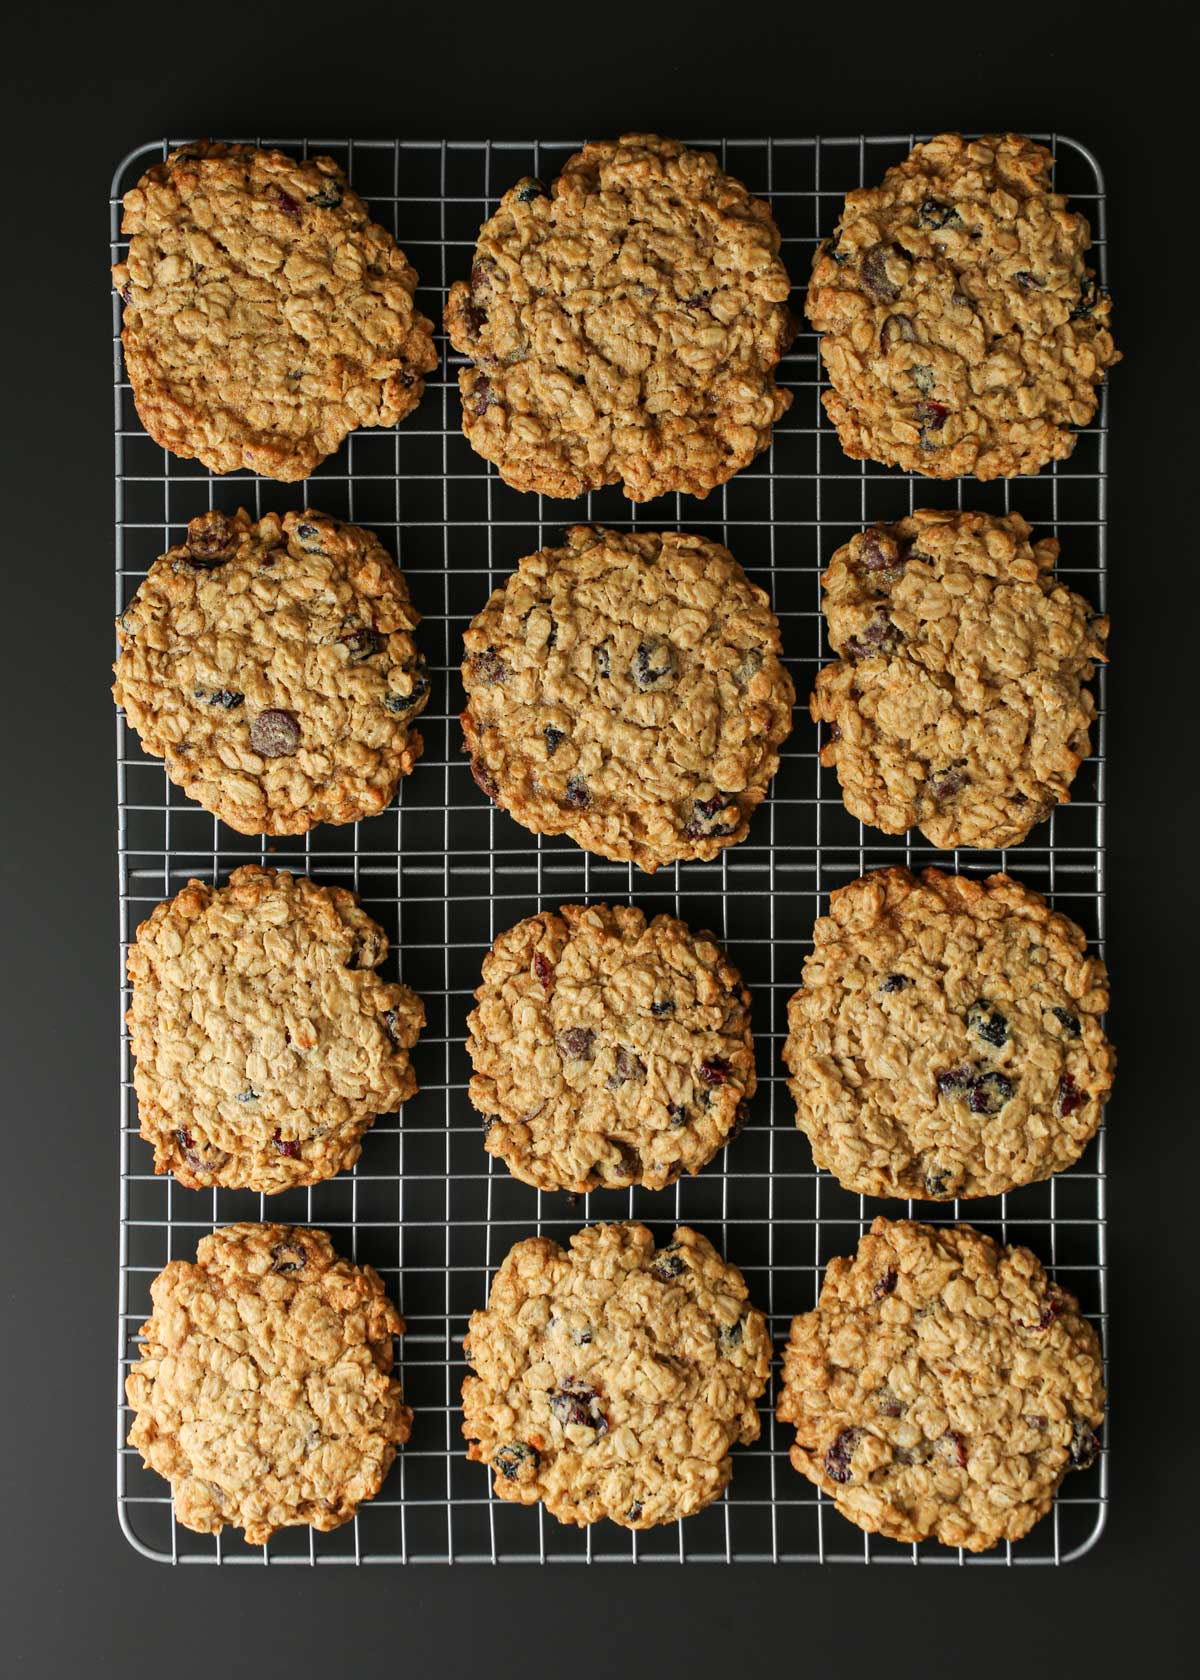 array of oatmeal craisin cookies on wire rack on black table.